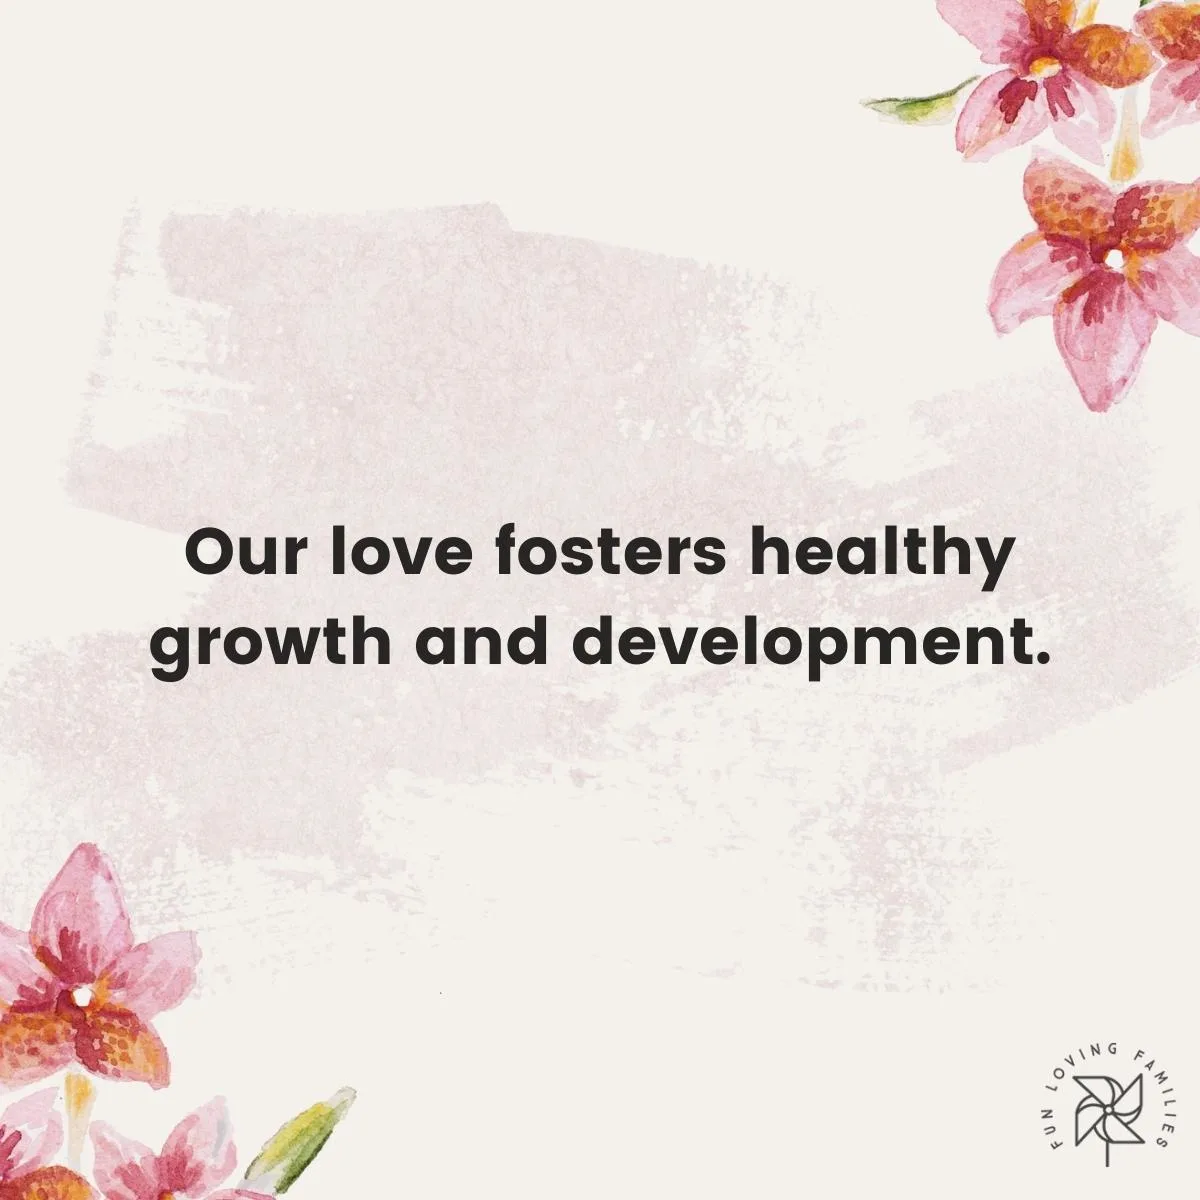 Our love fosters healthy growth and development affirmation image